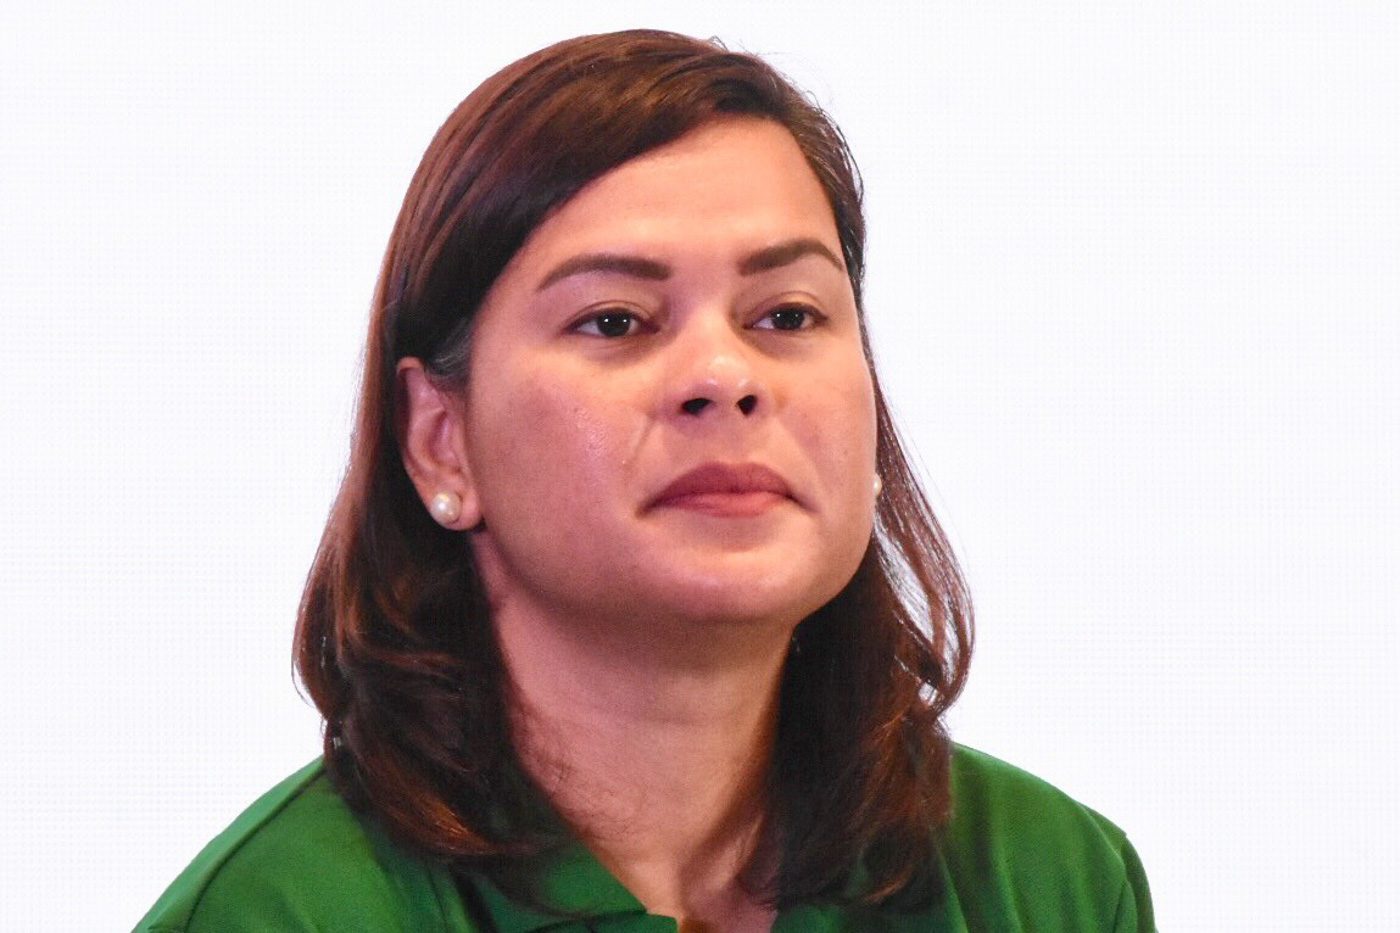 Sara Duterte slams ‘SC justice aspirant’ trying to get her attention